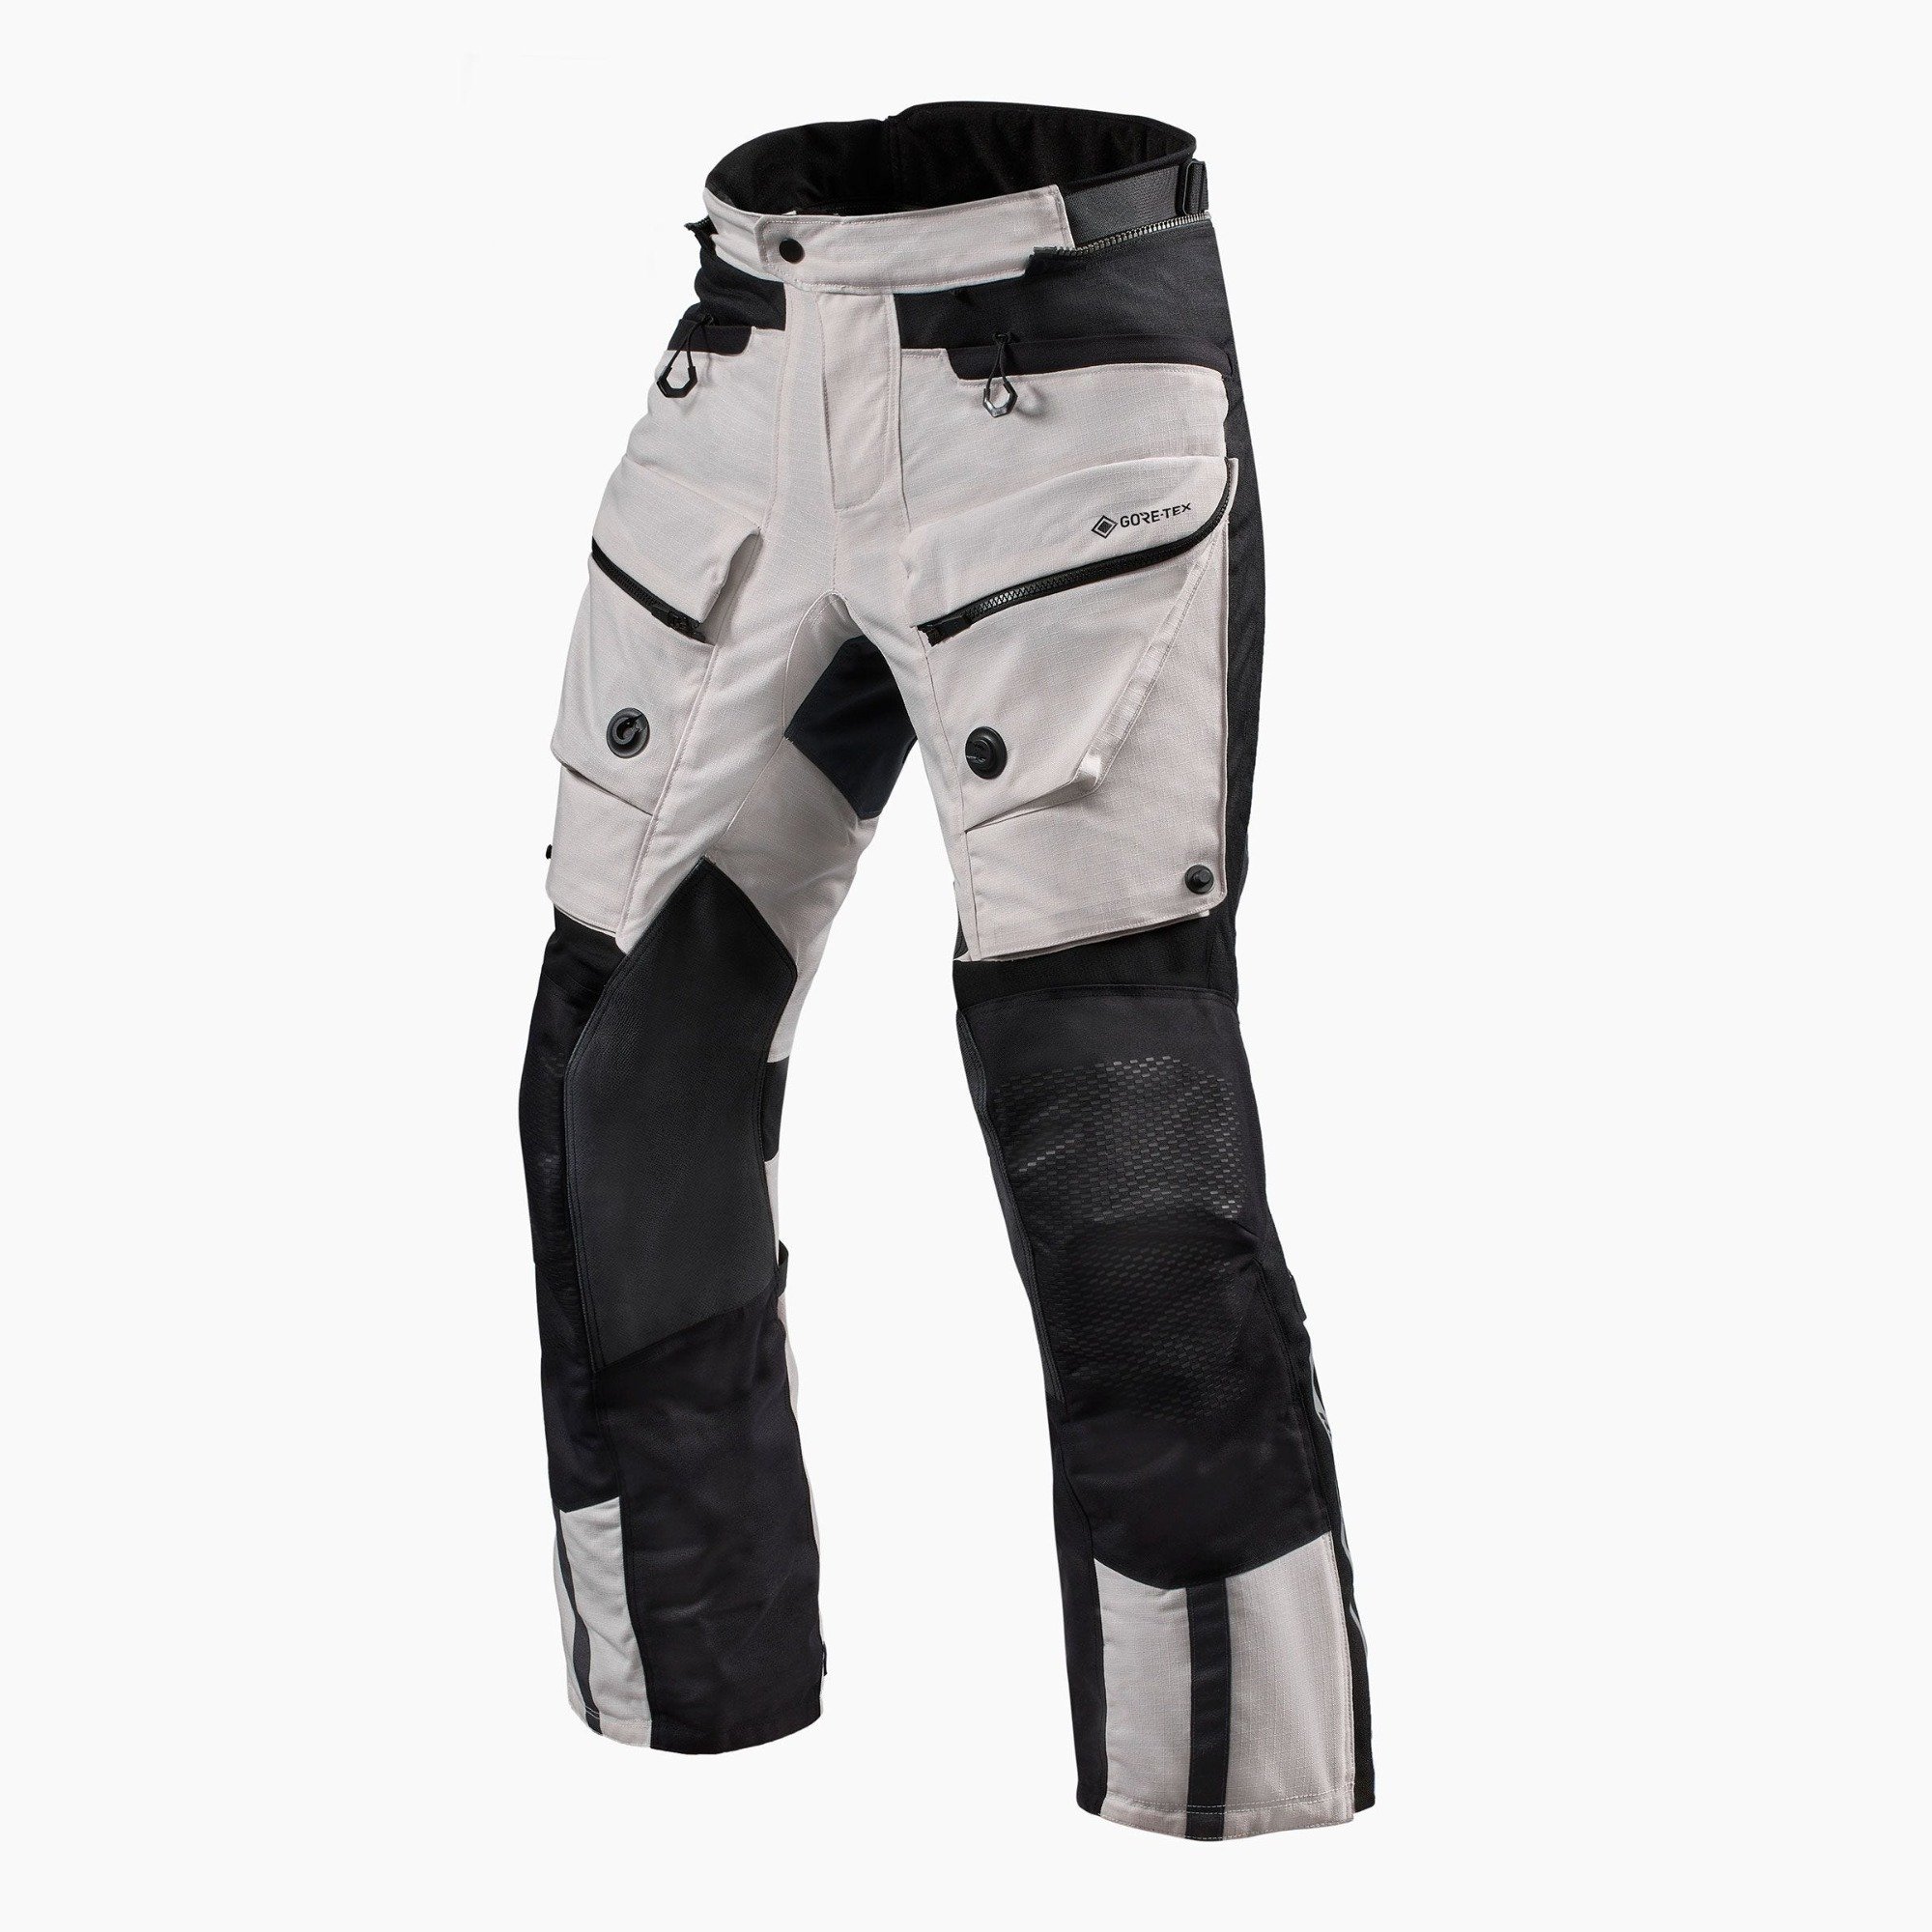 Image of REV'IT! Trousers Defender 3 GTX Silver Black Standard Motorcycle Pants Talla S